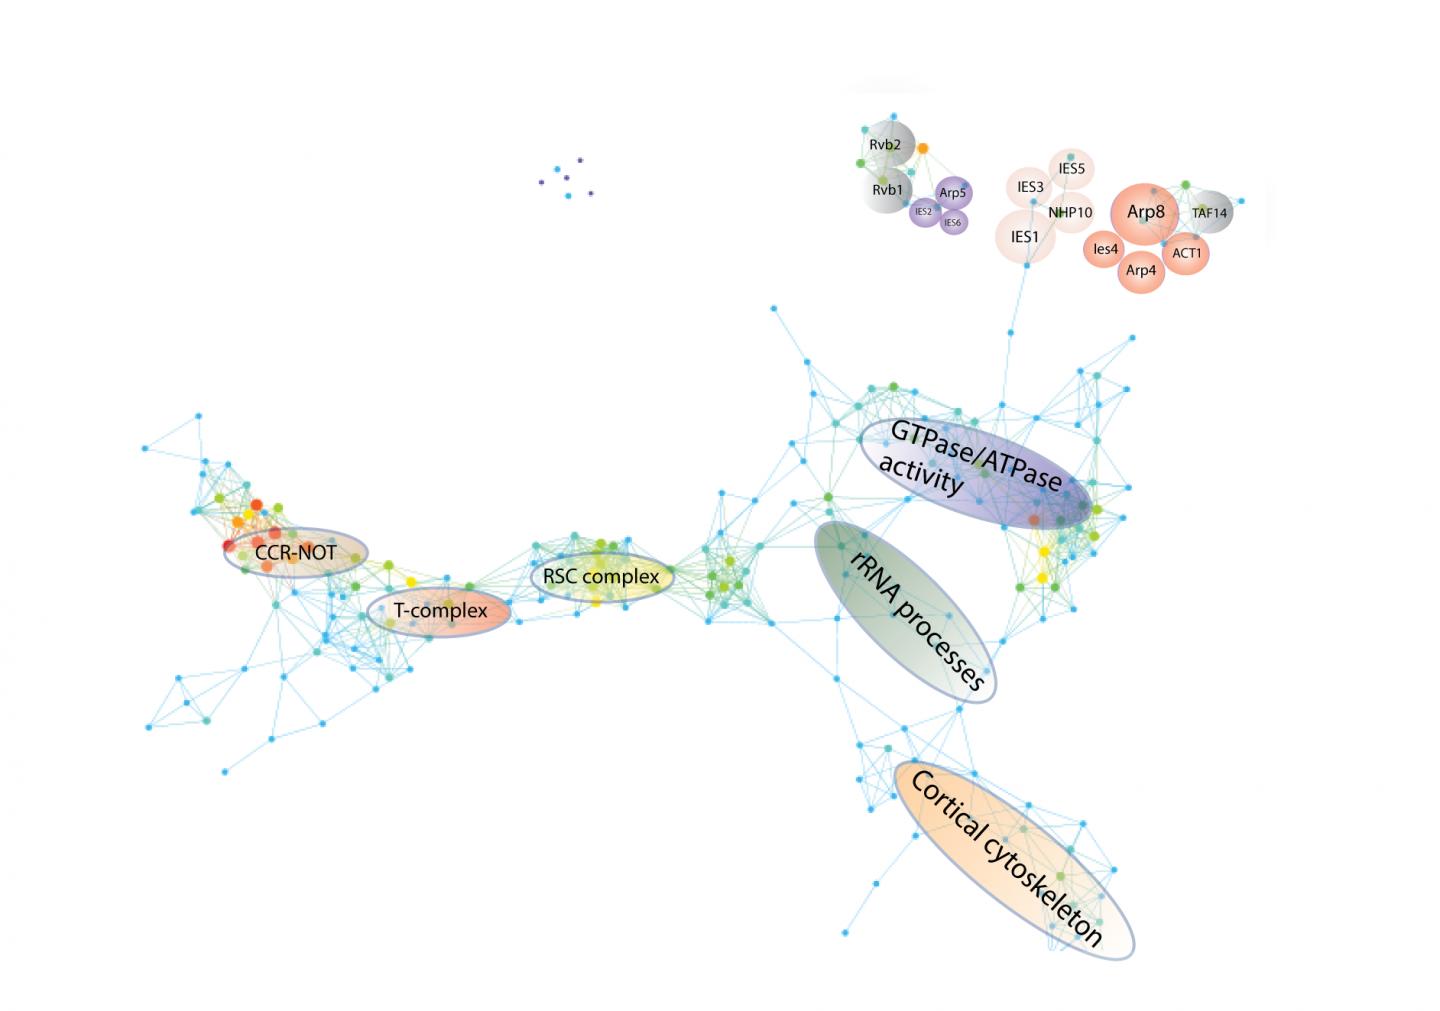 A Visualization of an INO80 Perturbed Protein Interaction Network